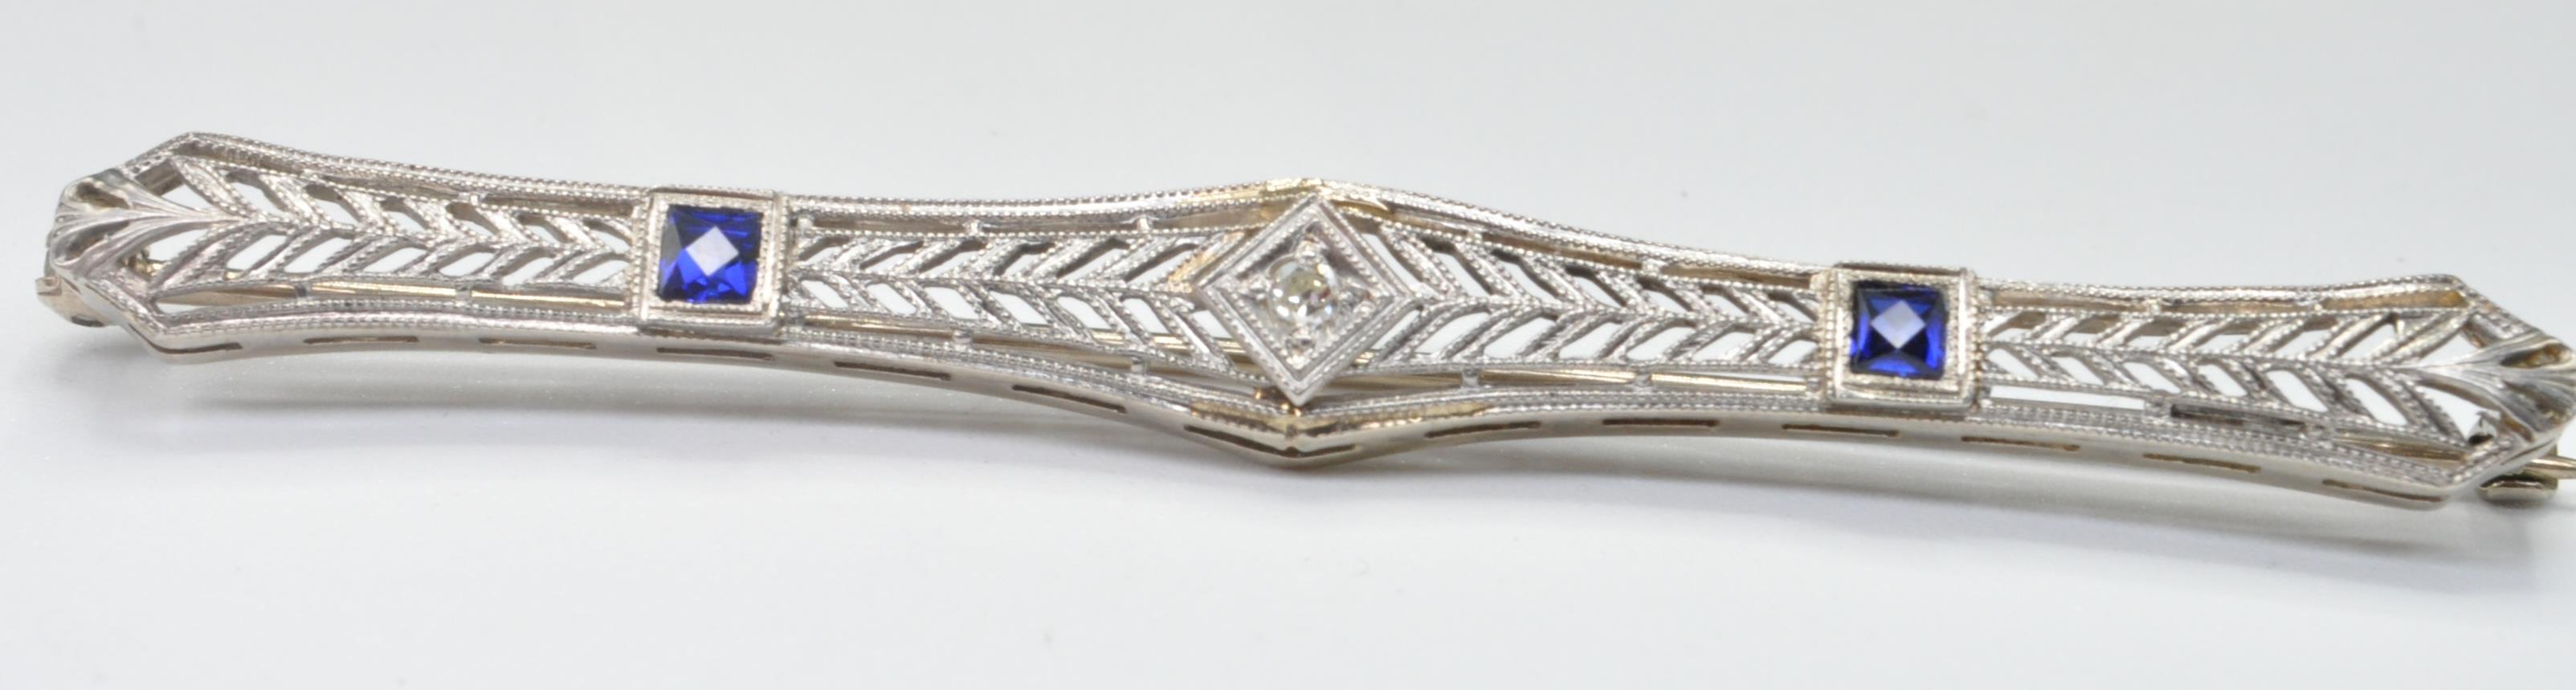 ANTIQUE WHITE GOLD DIAMOND AND SAPPHIRE BAR BROOCH - Image 4 of 6